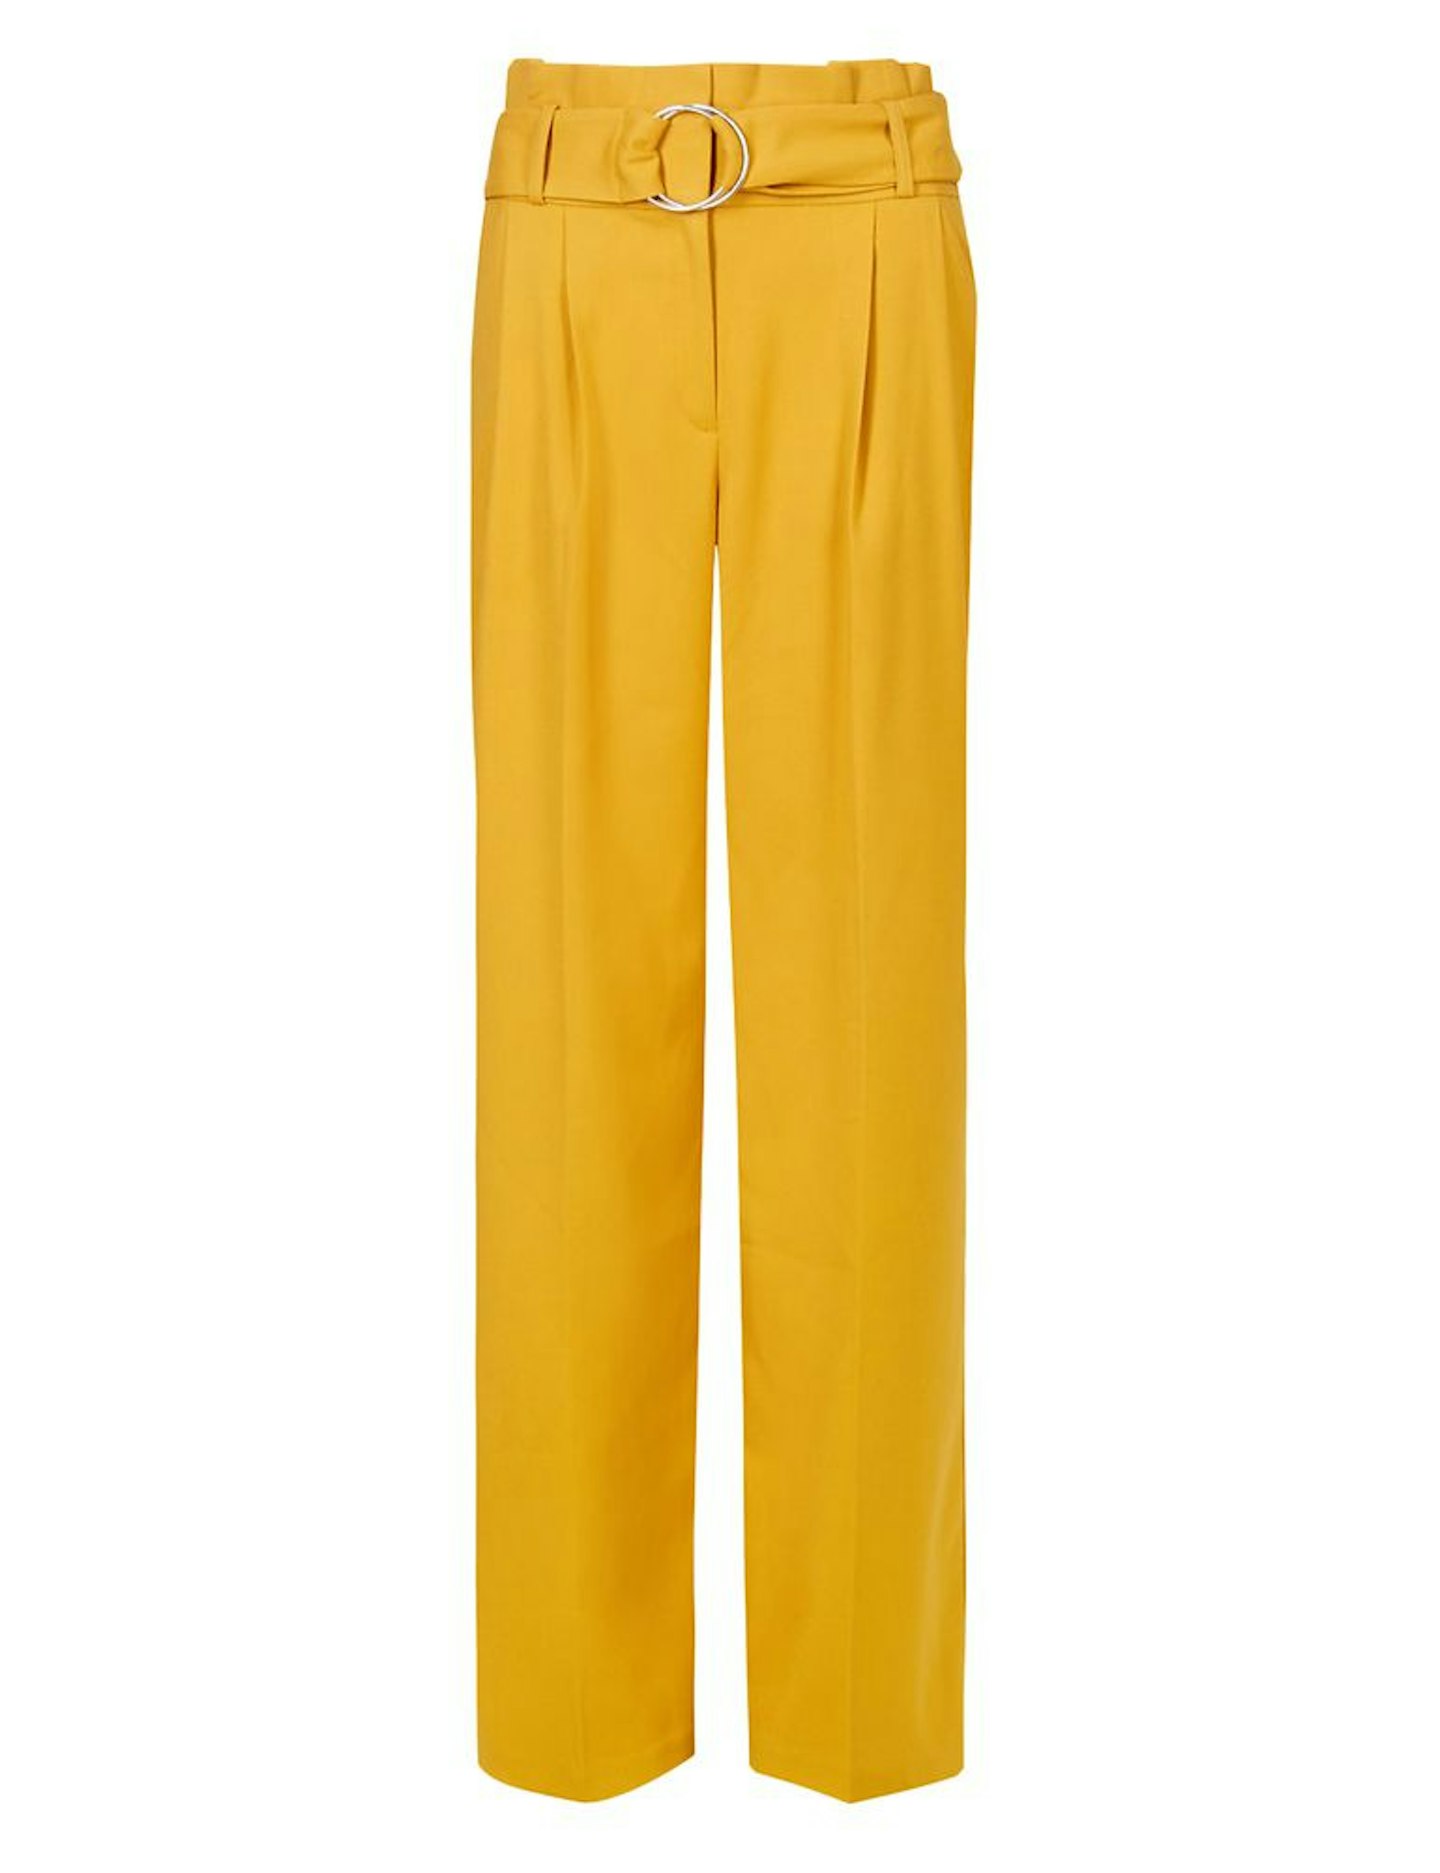 Yellow wide leg M&S trousers